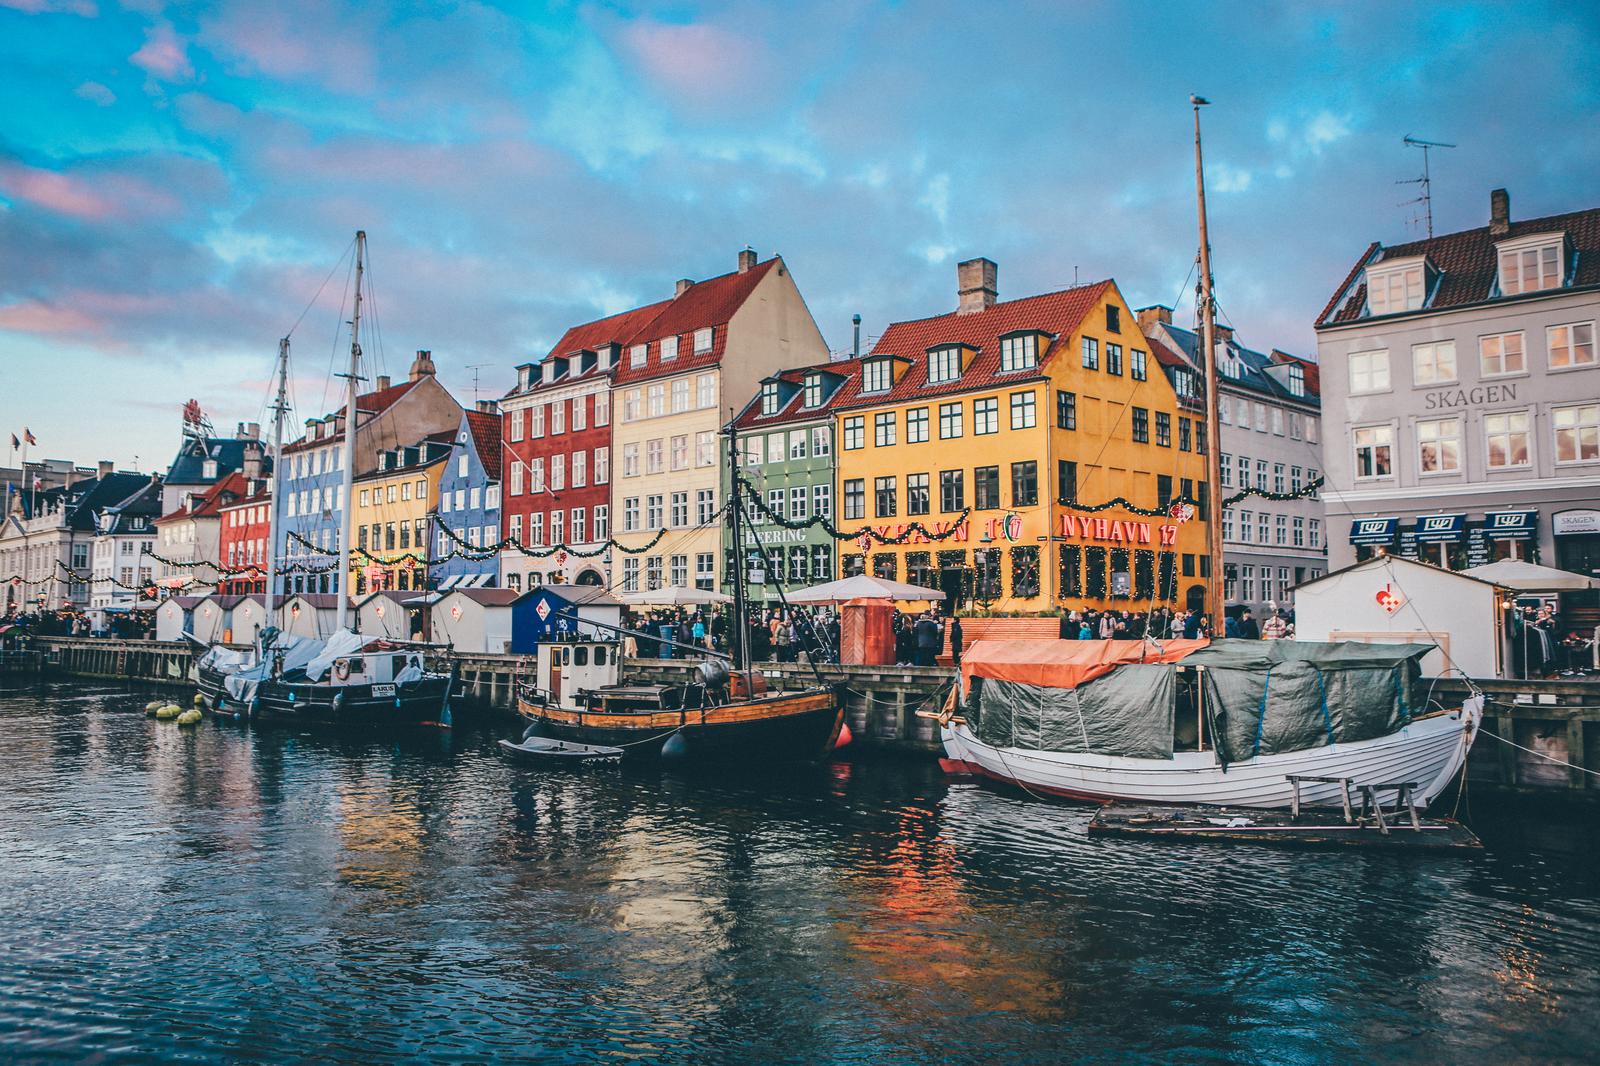 Wanna Know Where You’ll Meet Your Soulmate? ✈️ Go Around the World from “A” to “Z” to Find Out Once and for All Denmark